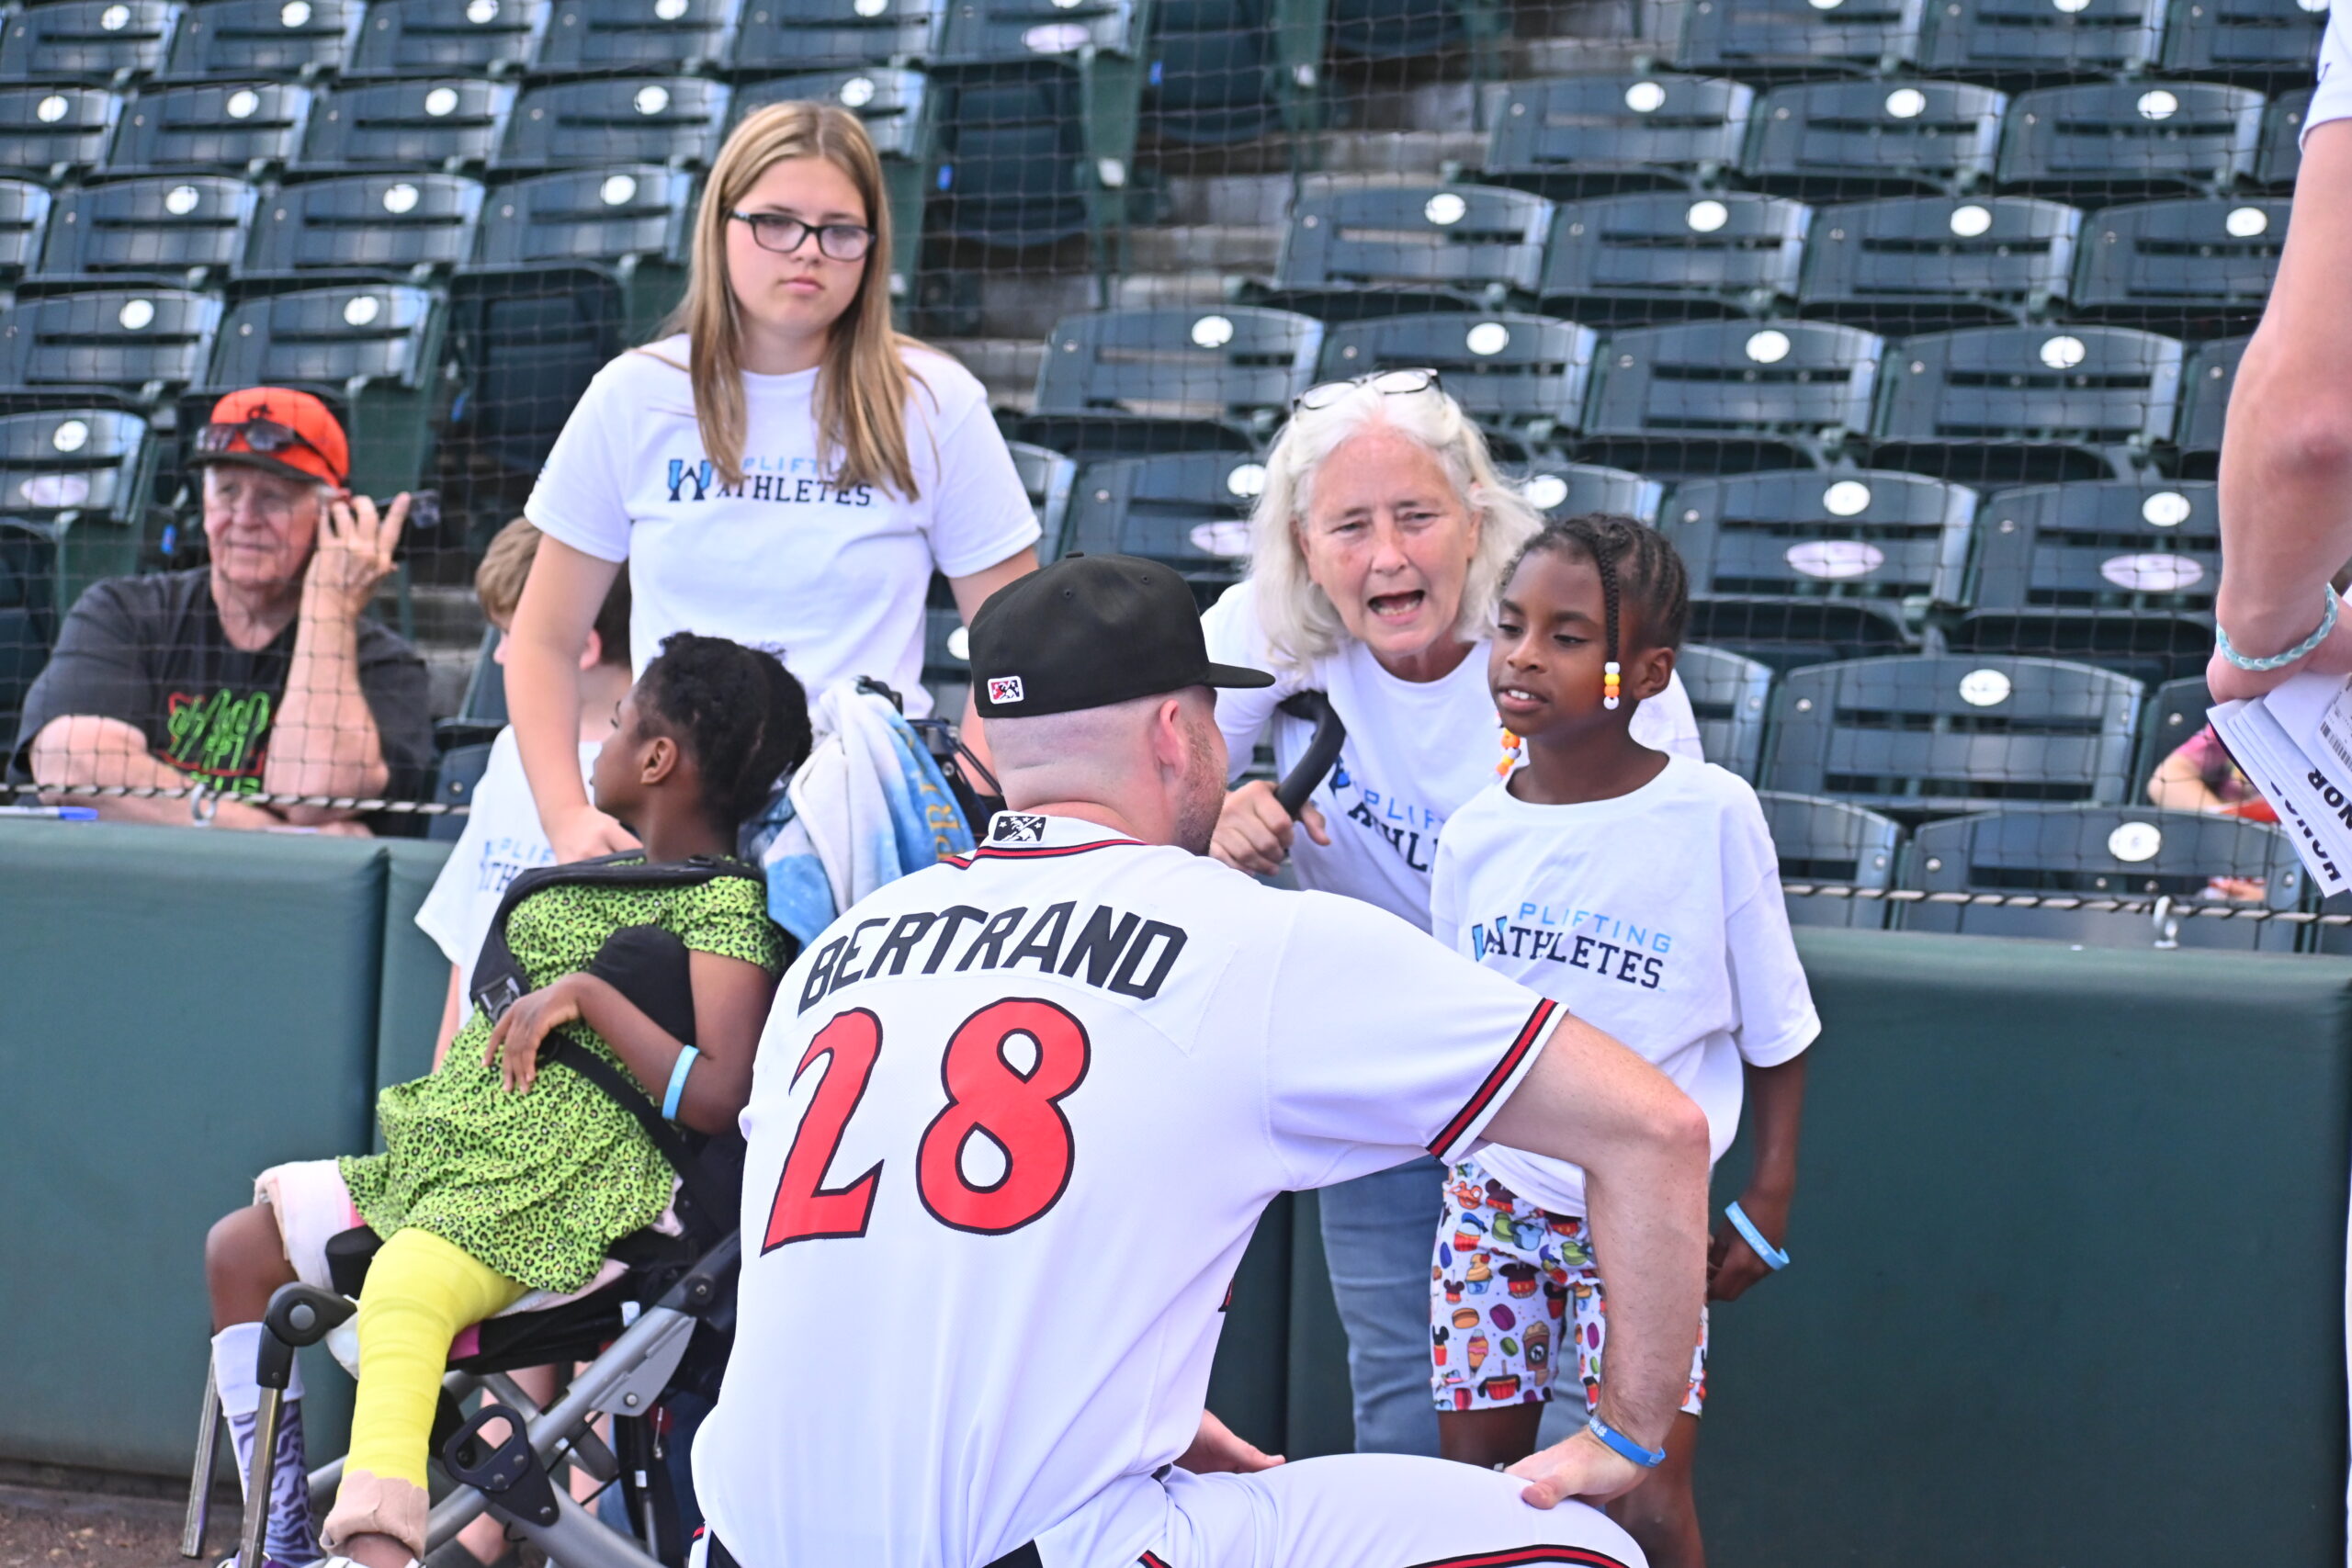 Pitcher John Michael Bertrand with a family at an Uplifting Experience